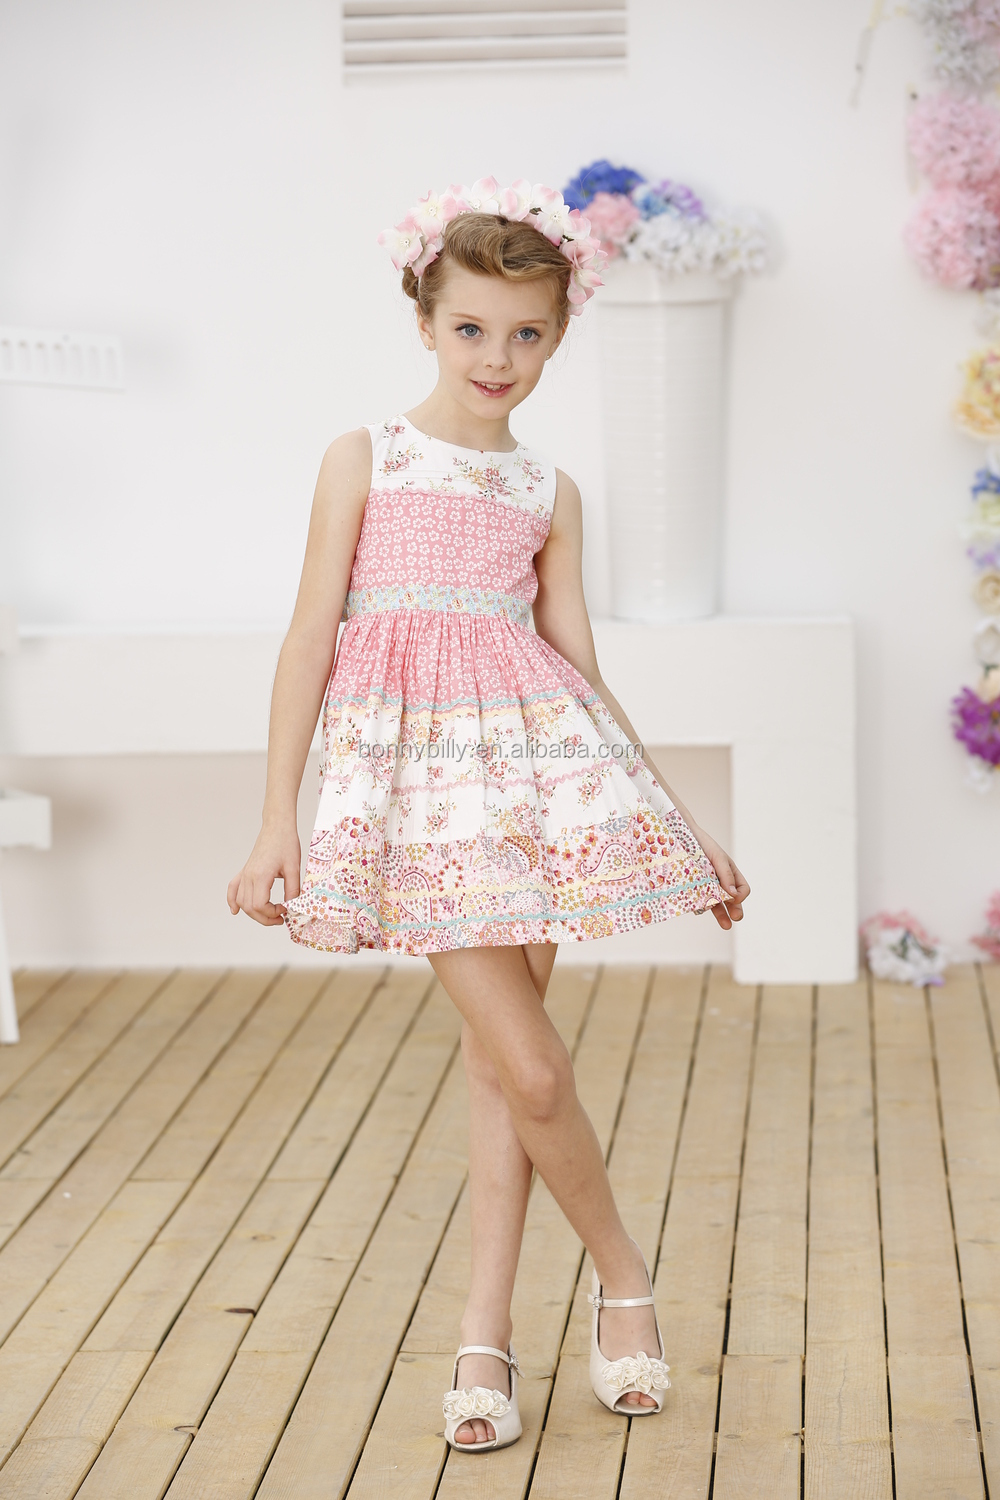 Clothes For 12 Year Old Girls Beauty Clothes truly 8 Year Old Girl Clothes